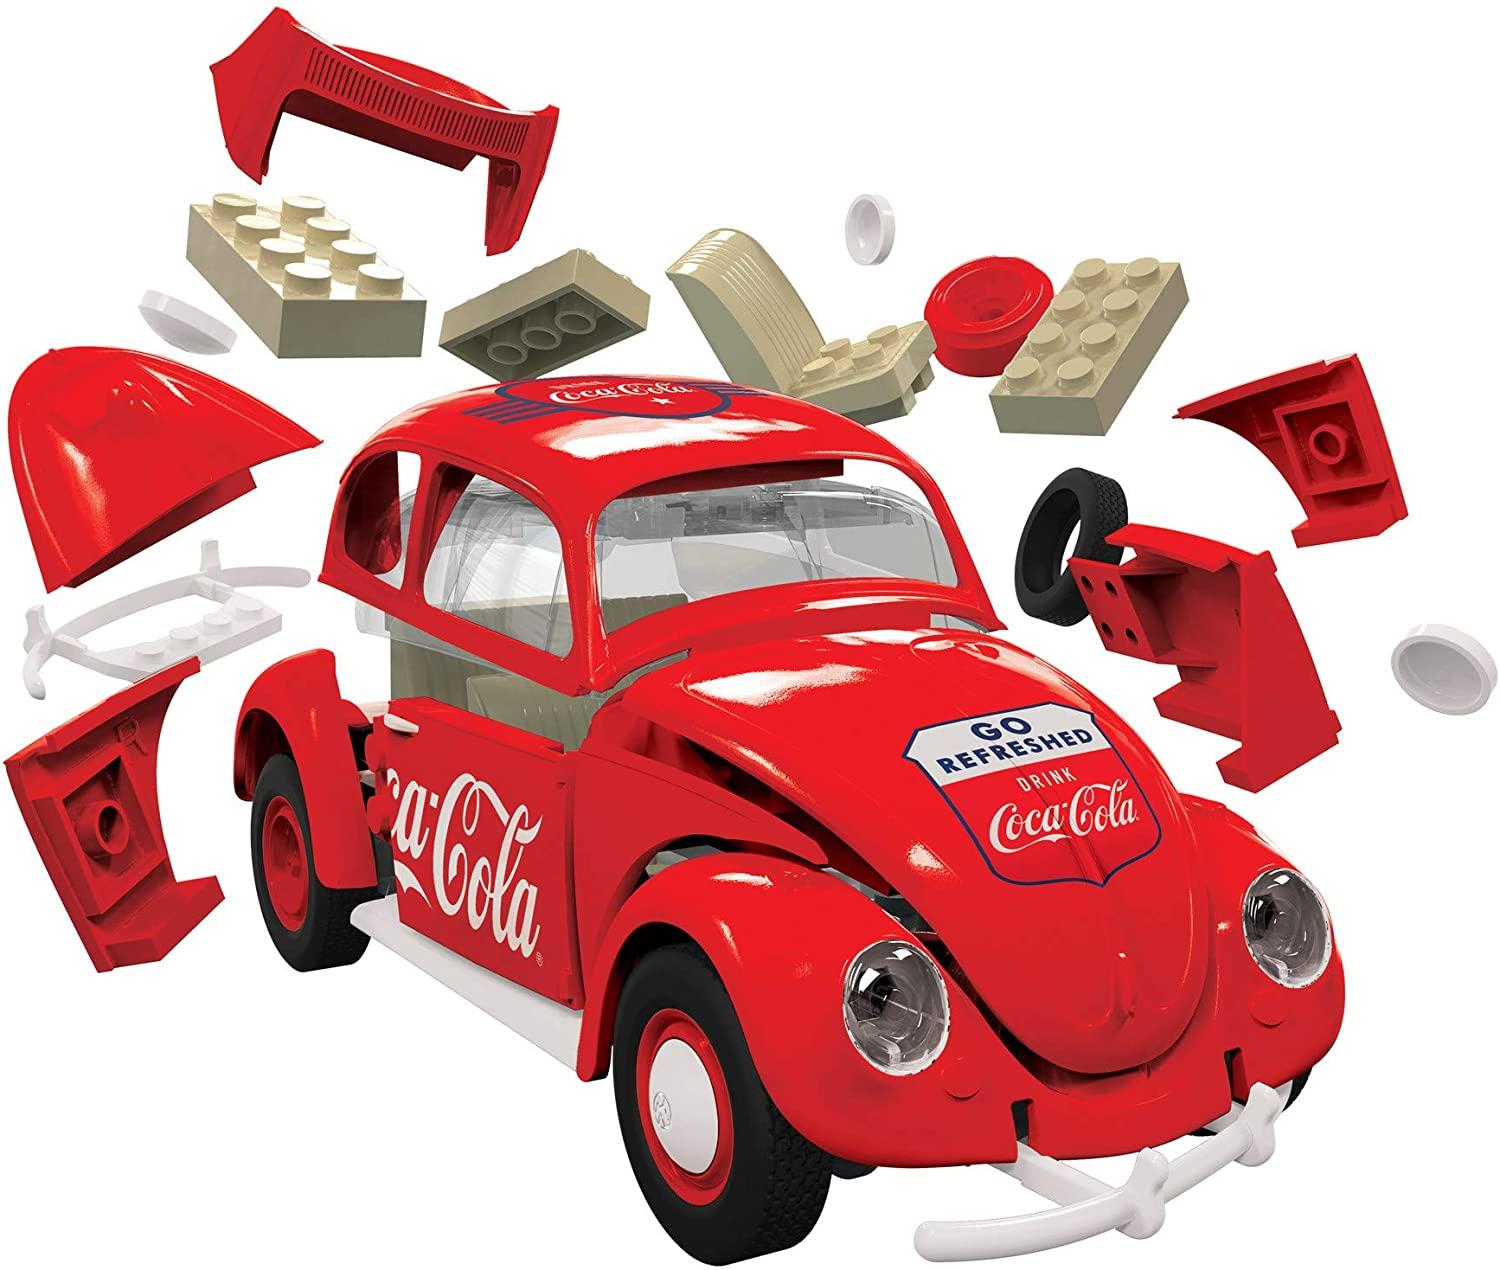 Parts for red, Coca-Cola branded model beetle car.